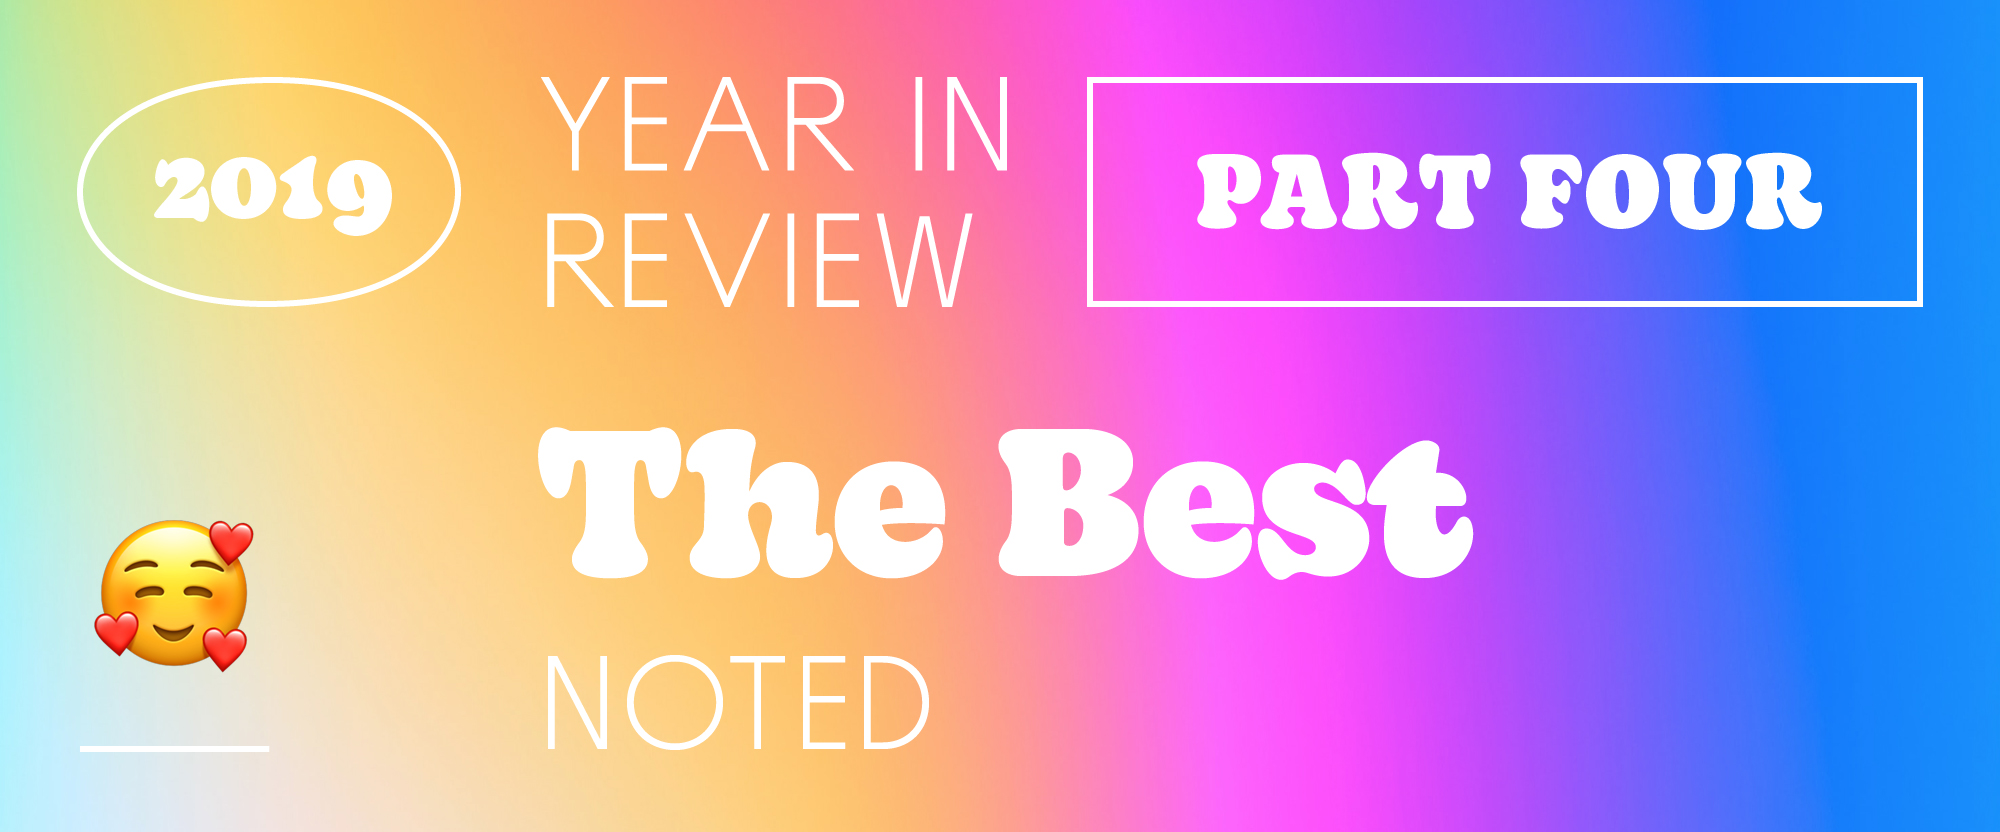 The Best and Worst Identities of 2019, Part 4: The Best Noted